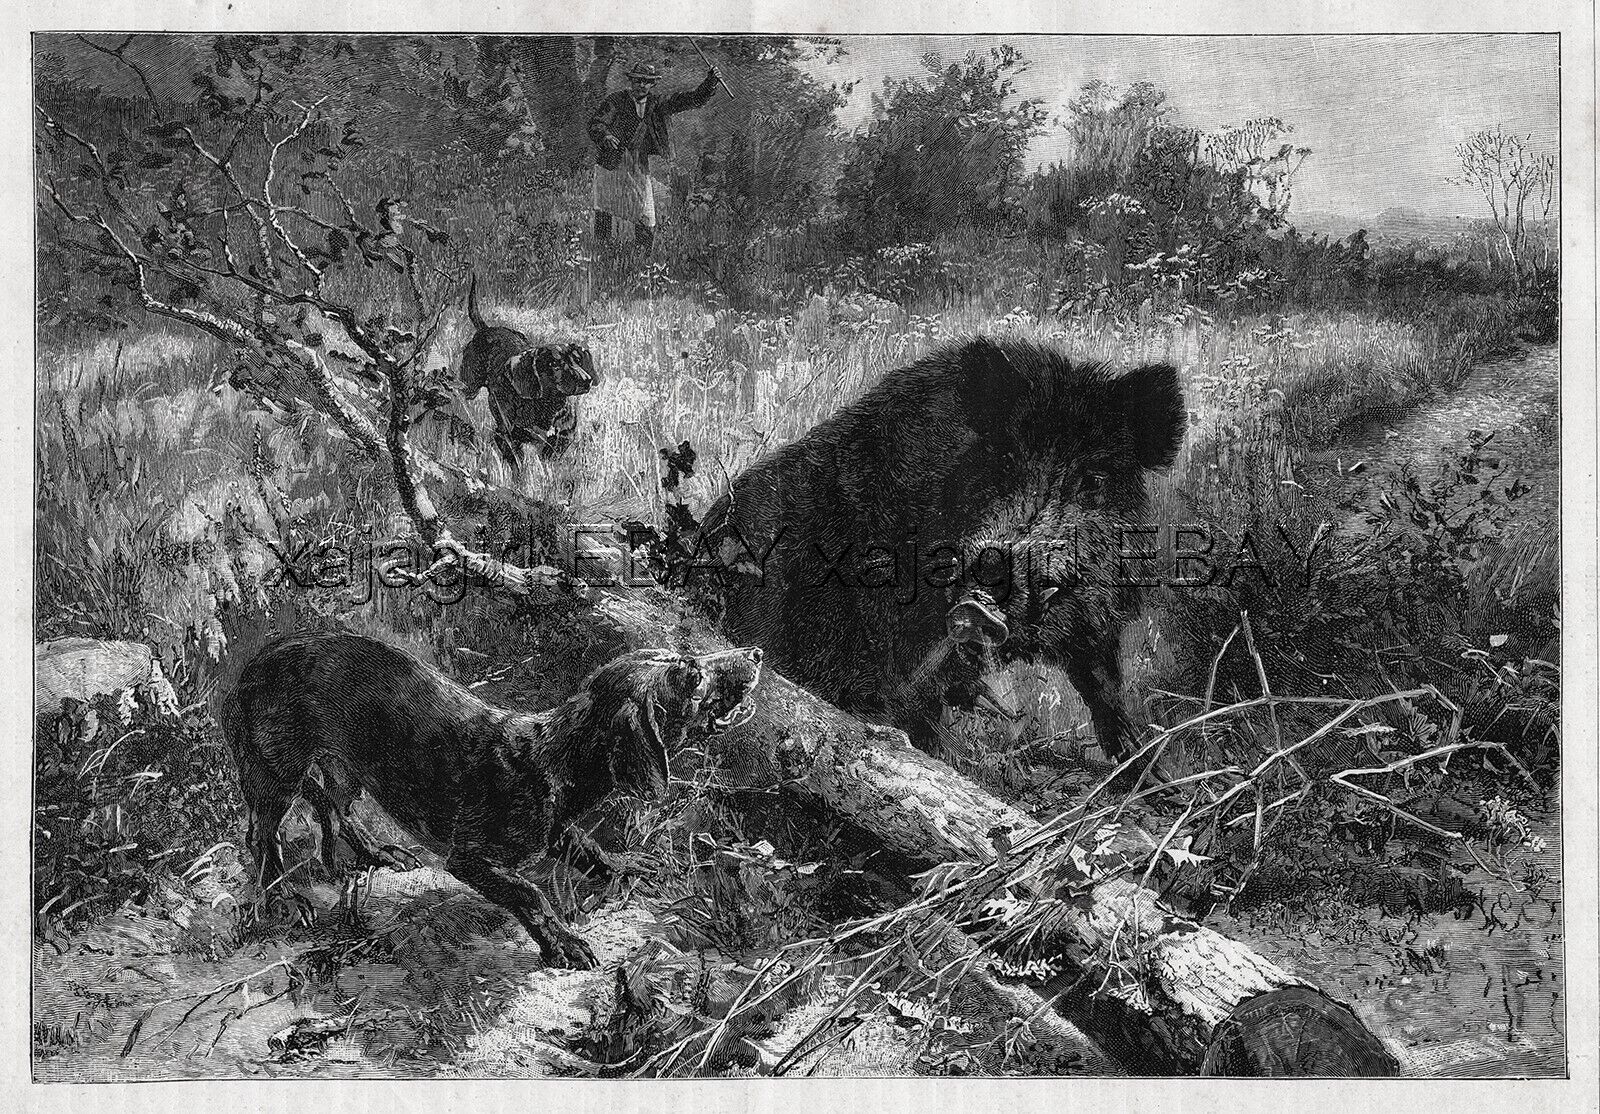 Dog Dachshund Two Dogs Hunting Wild Boar, Large 1880s Antique Print